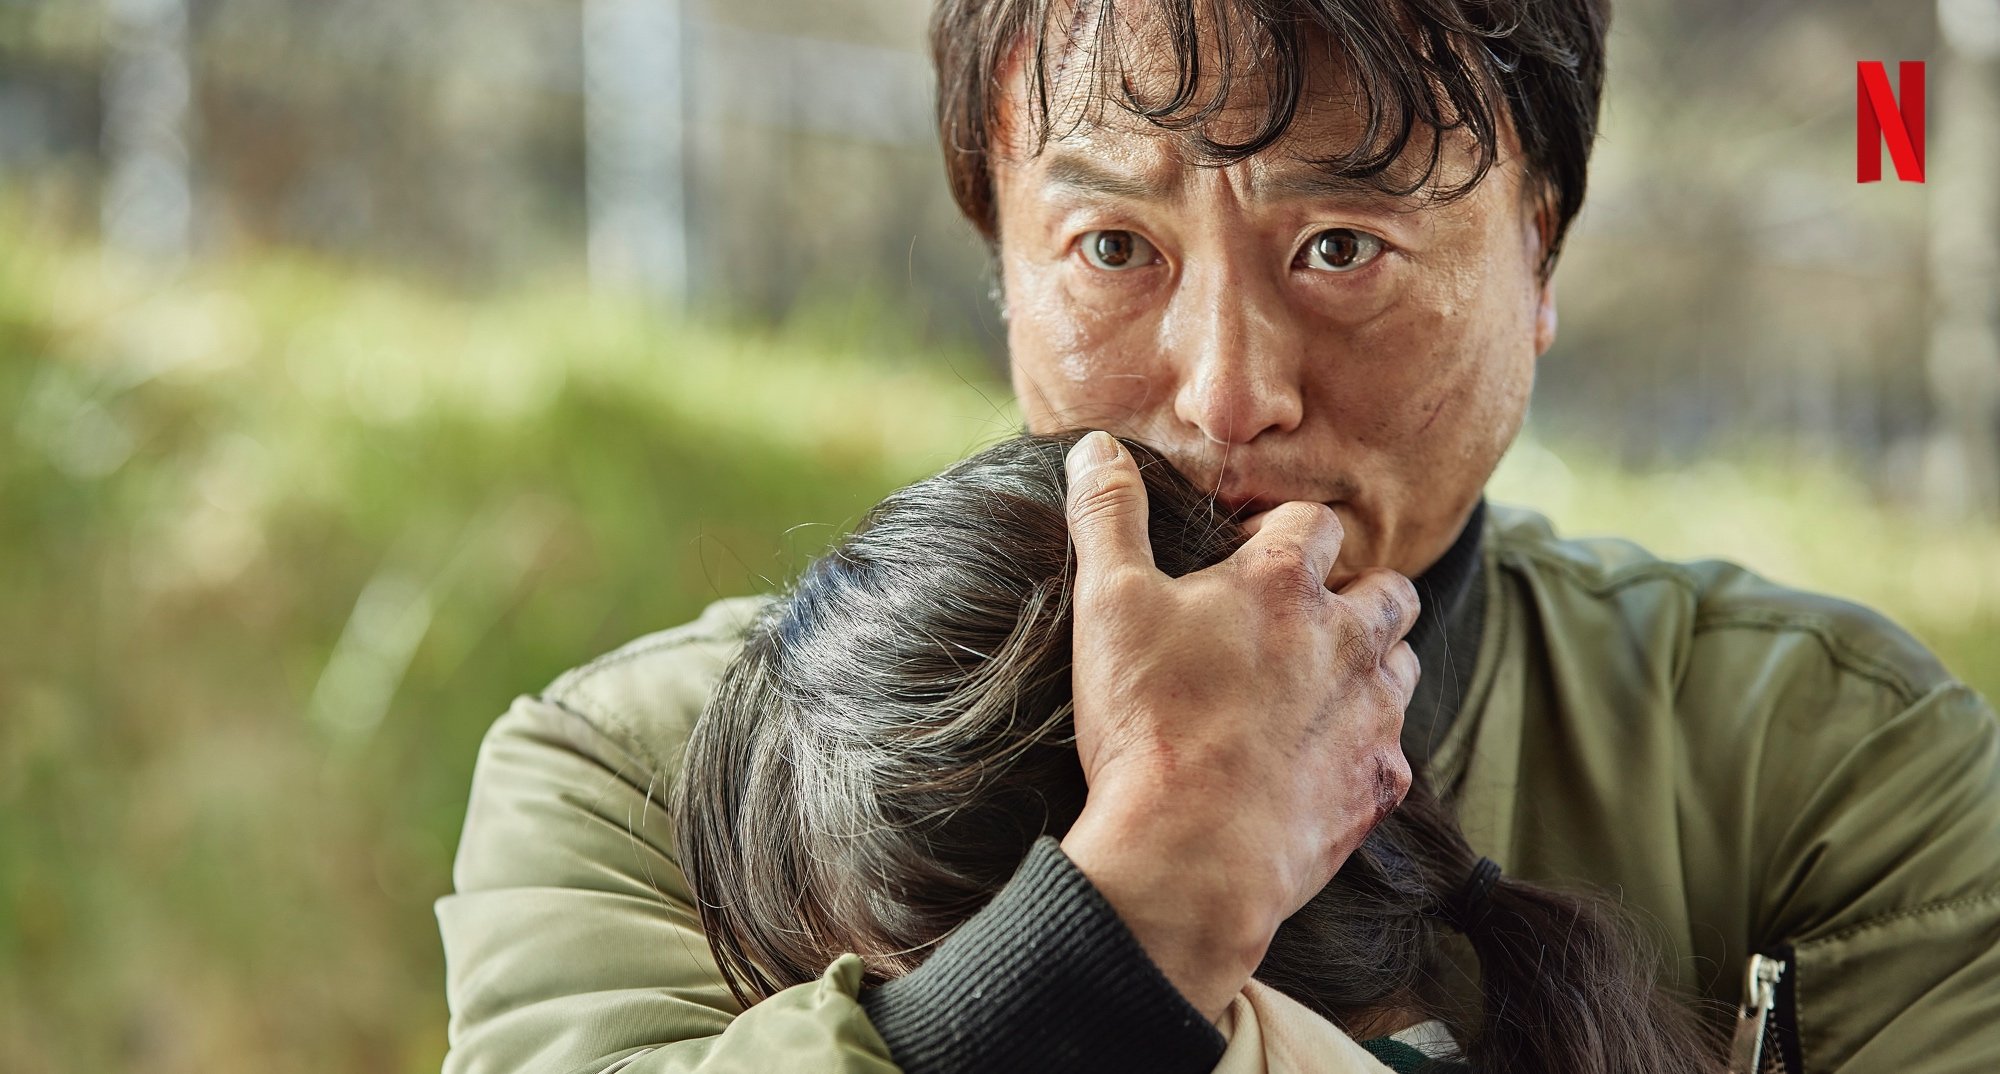 Character So-ju from 'All of Us Are Dead' Episode 11 embracing On-jo before his death.